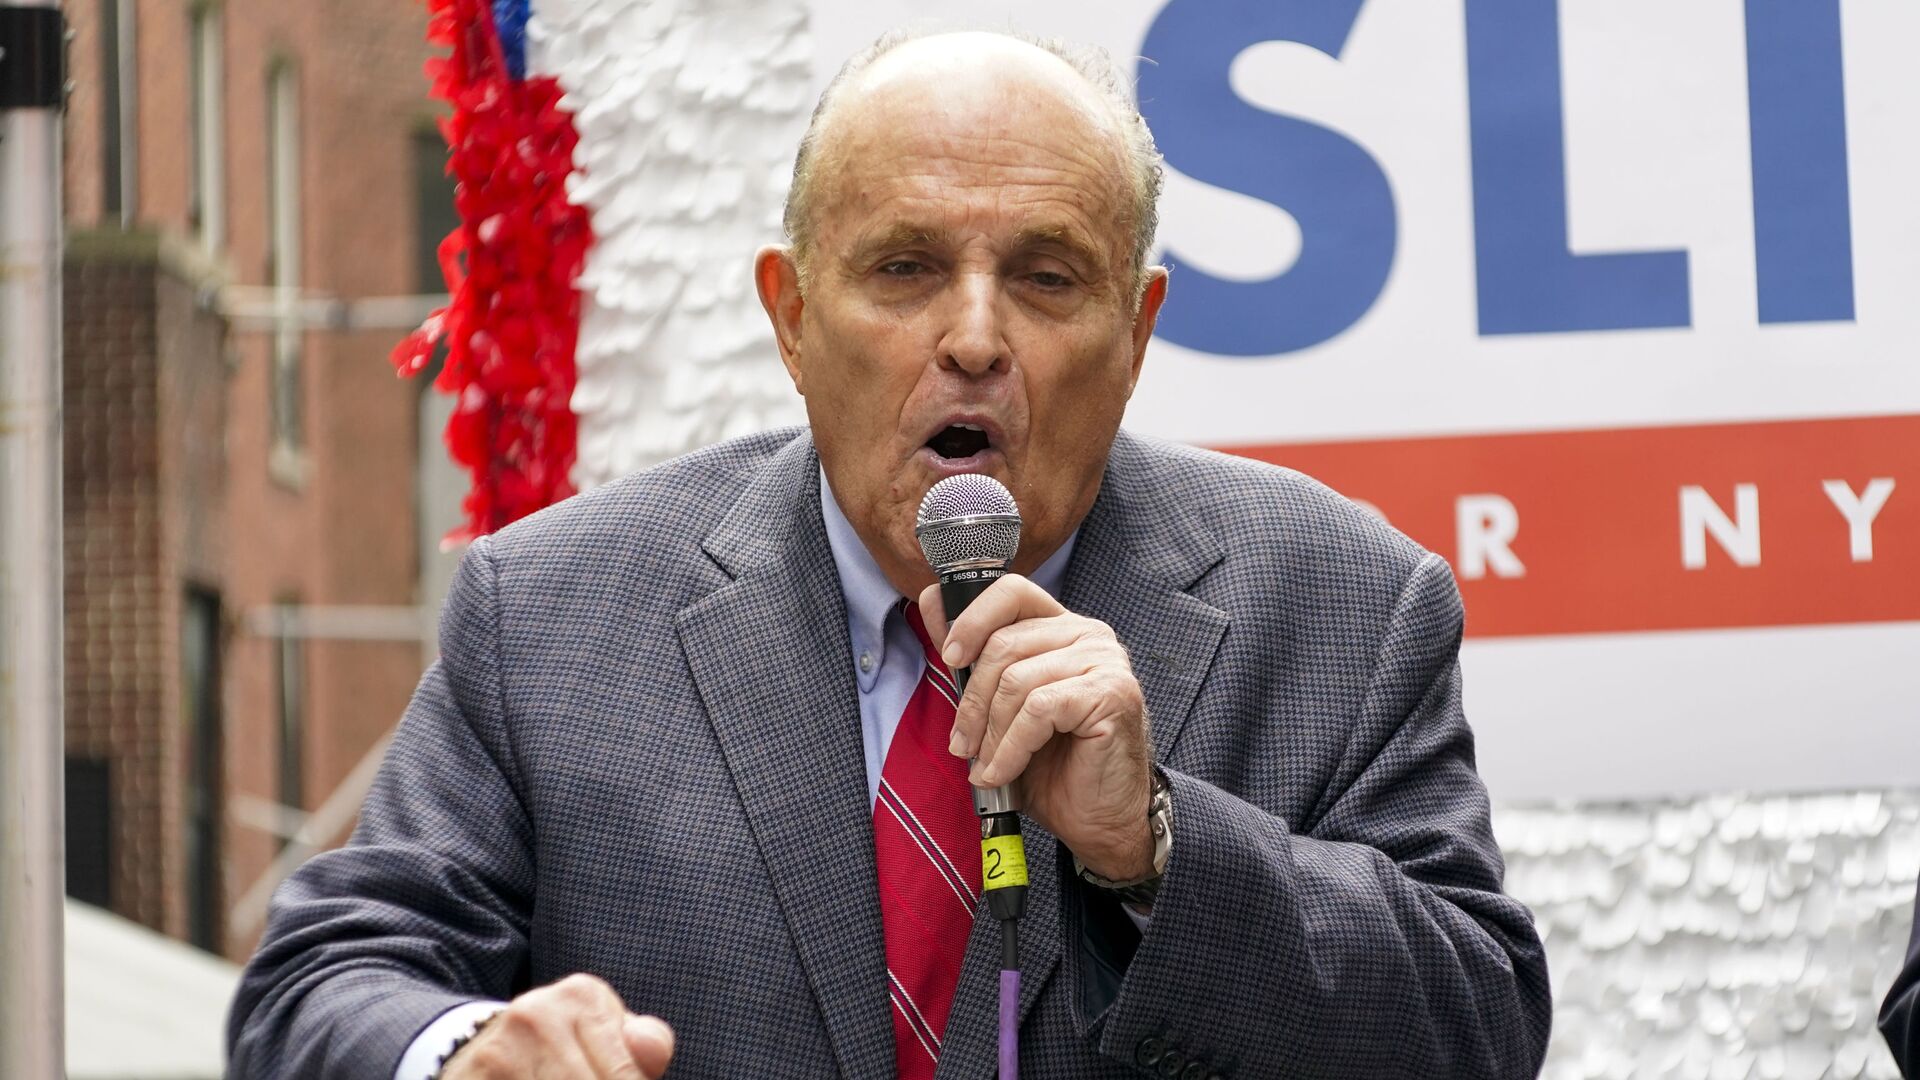 Former New York City Mayor Rudy Giuliani speaks during a campaign event for Republican mayoral candidate Curtis Sliwa, Monday, June 21, 2021, in New York. Giuliani endorsed Sliwa in his bid for mayor. - Sputnik International, 1920, 23.05.2022